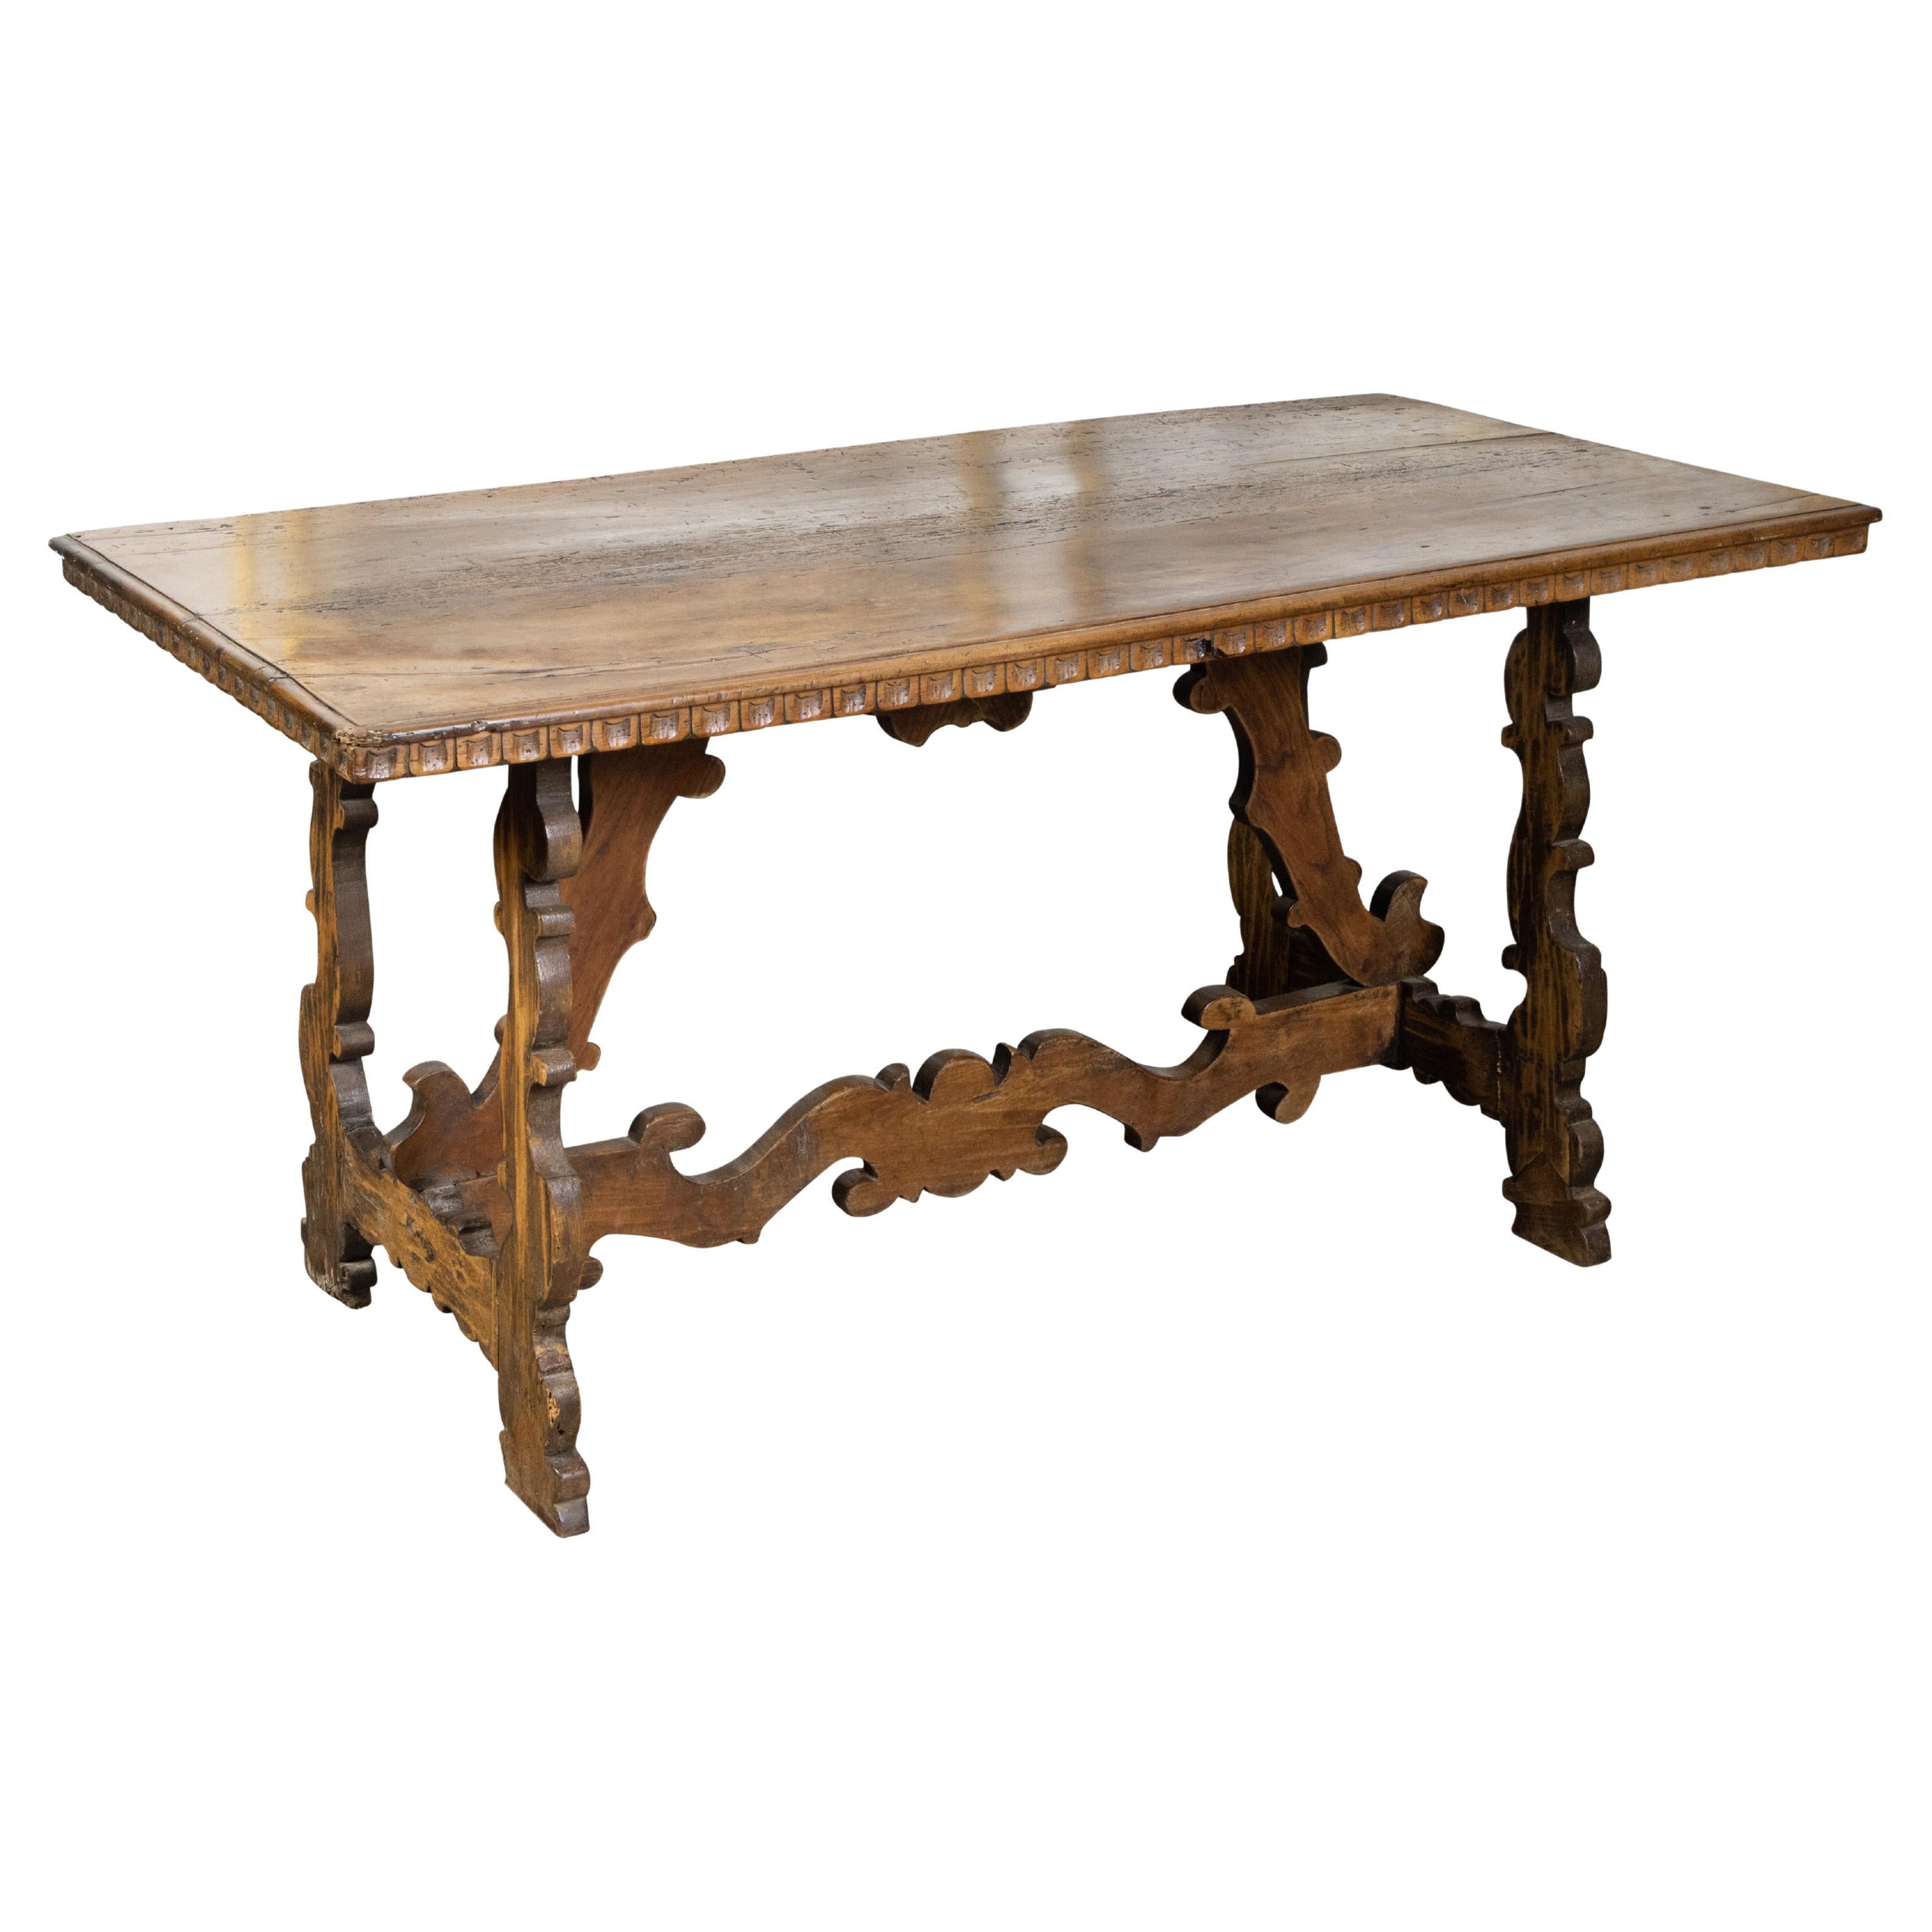 Italian Baroque Style 19th Century Walnut Table with Carved Trestle Base For Sale